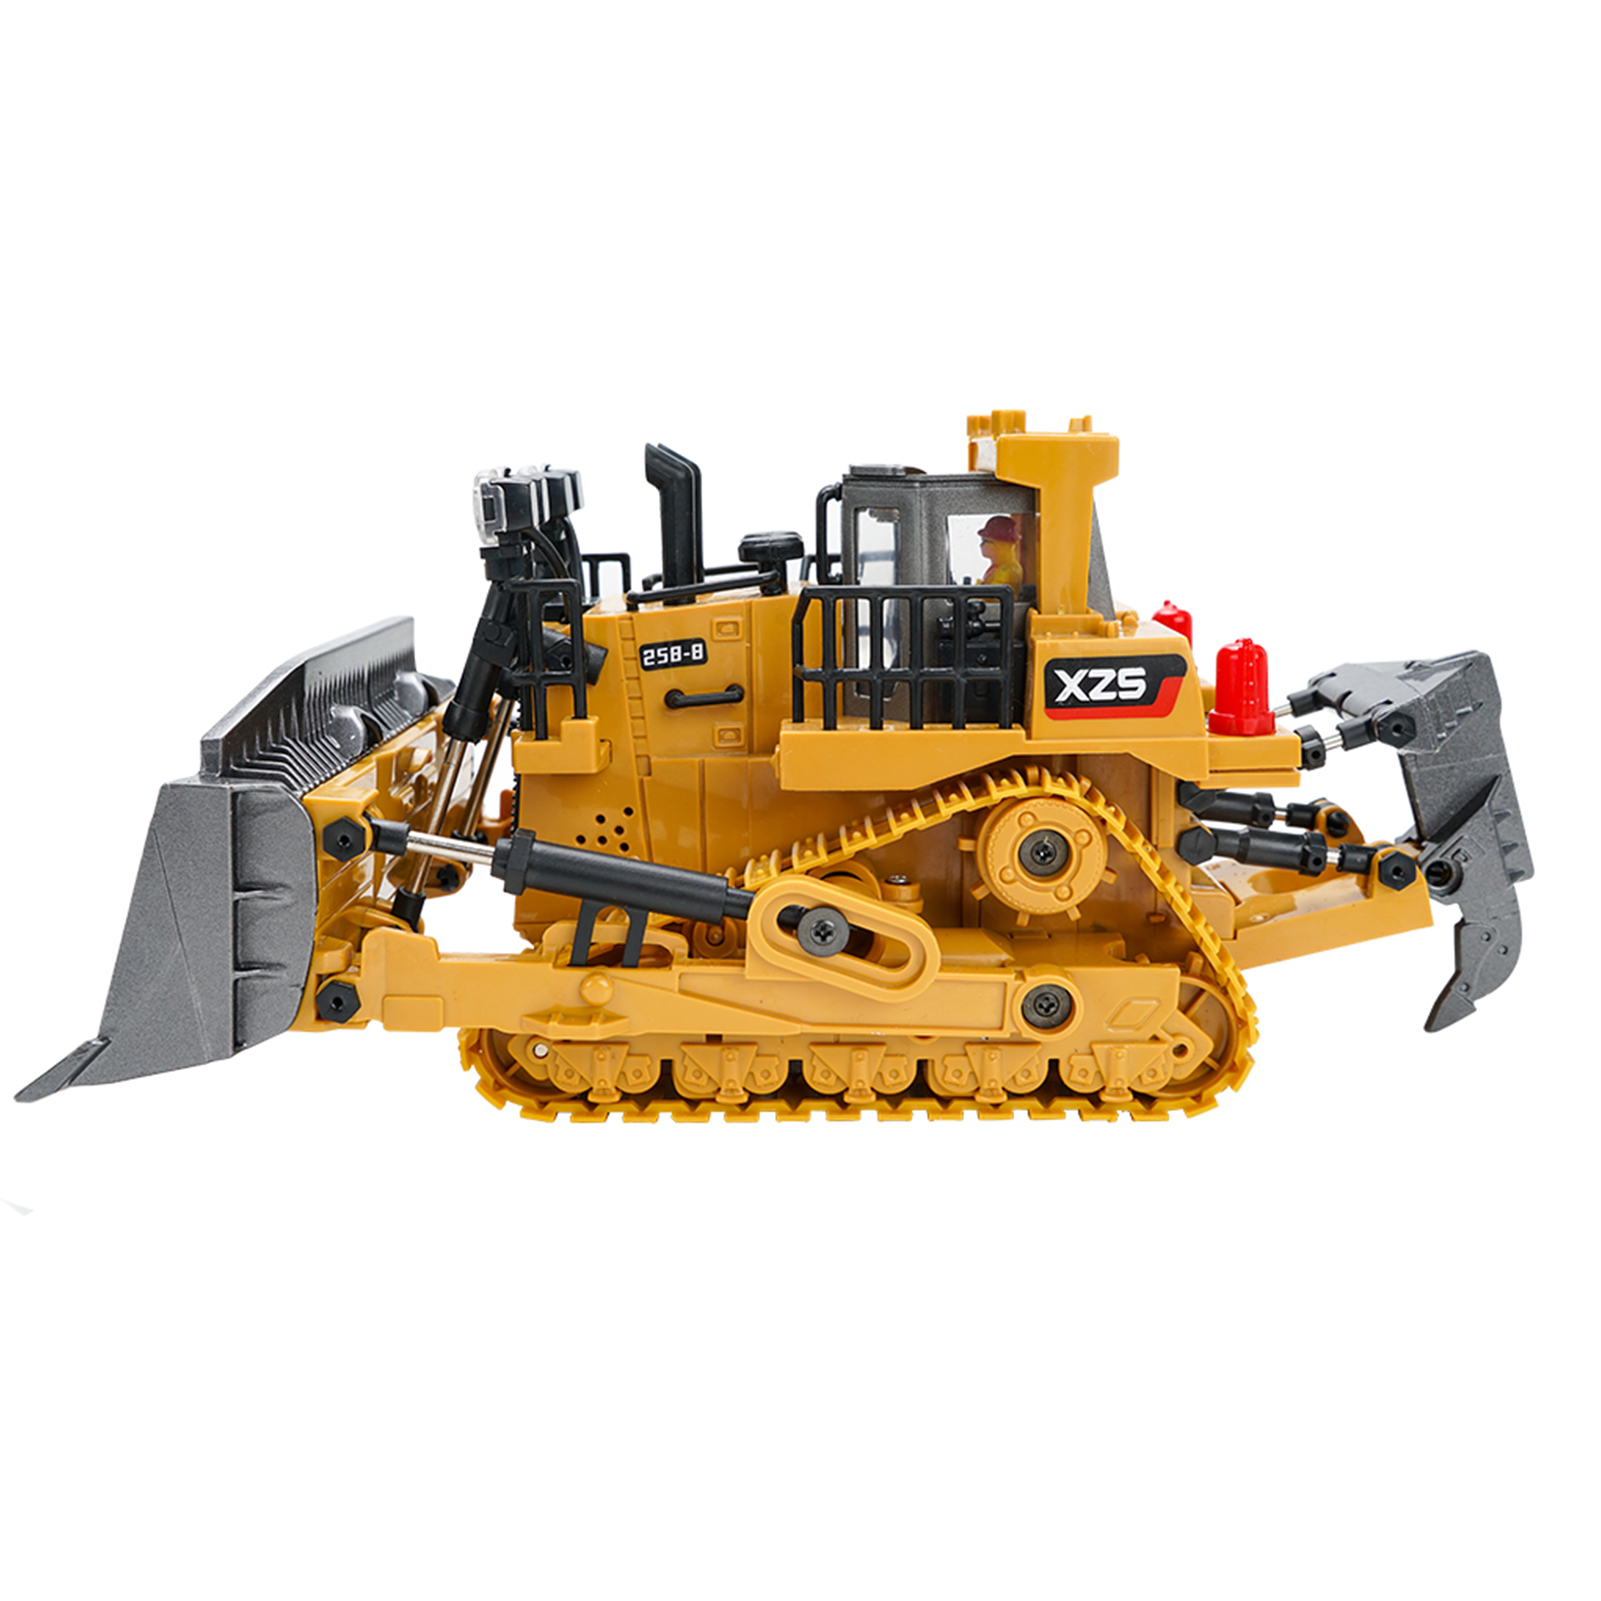 1:24 2.4G 9CH RC Bulldozer Alloy Bucket RC Tractor Truck Construction Engineering Vehicles with One Key Demonstration Lighting Simulation Sound Function Educational Toys for Kids - image 4 of 7